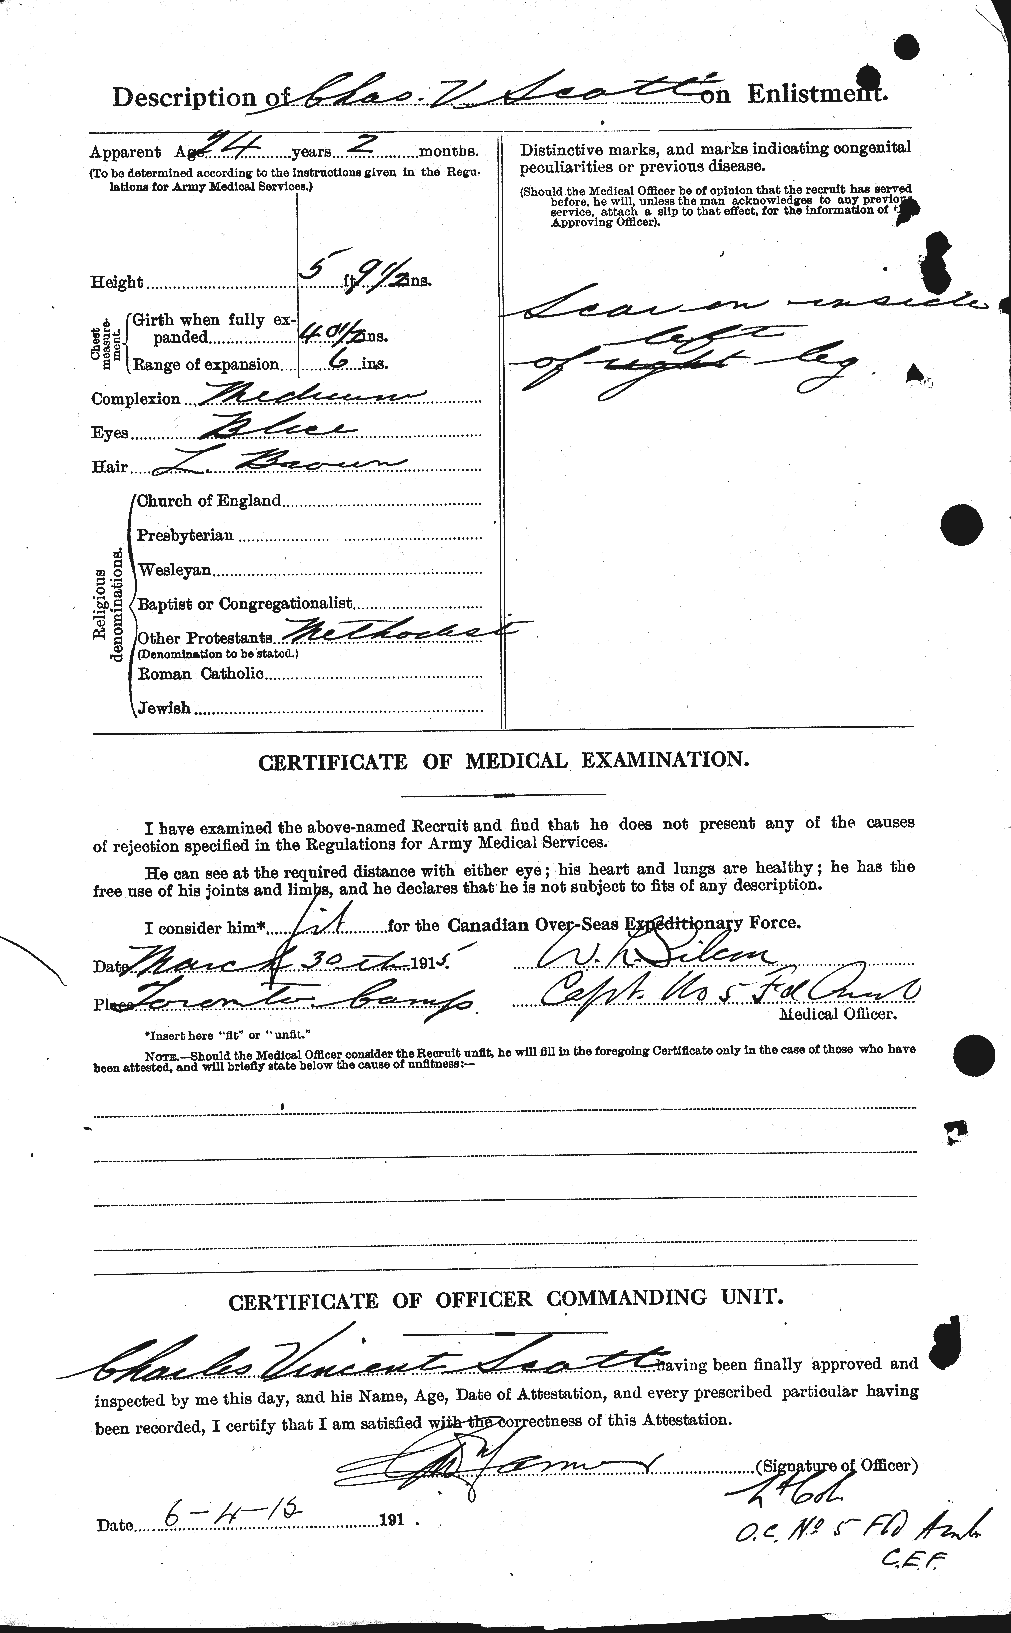 Personnel Records of the First World War - CEF 085874b